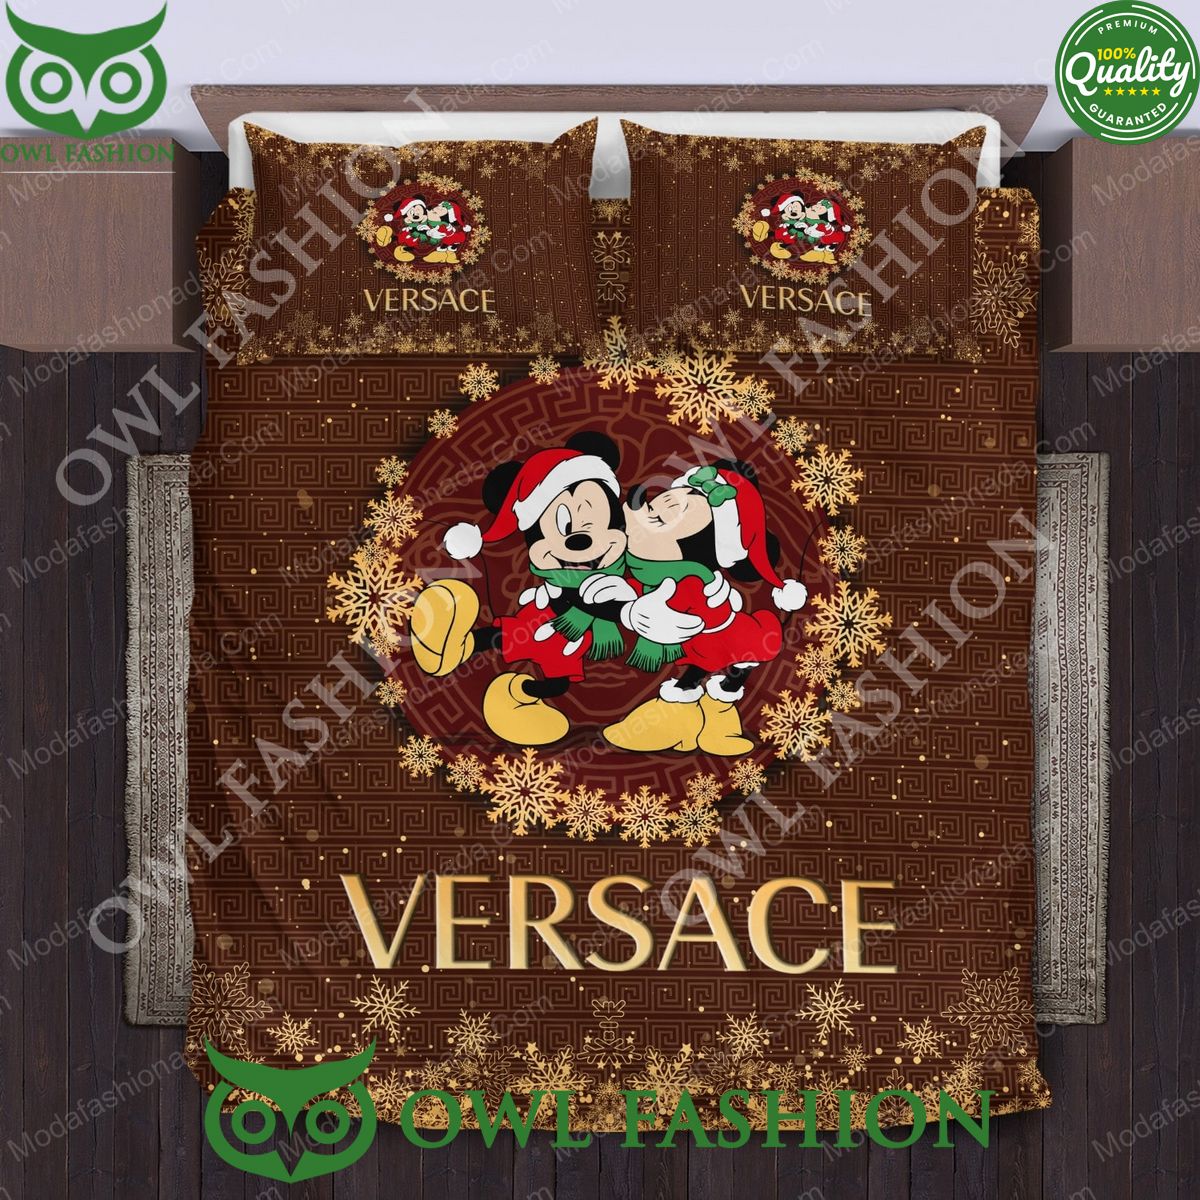 Mickey And Minnie Versace Merry Christmas Limited Bedding Set